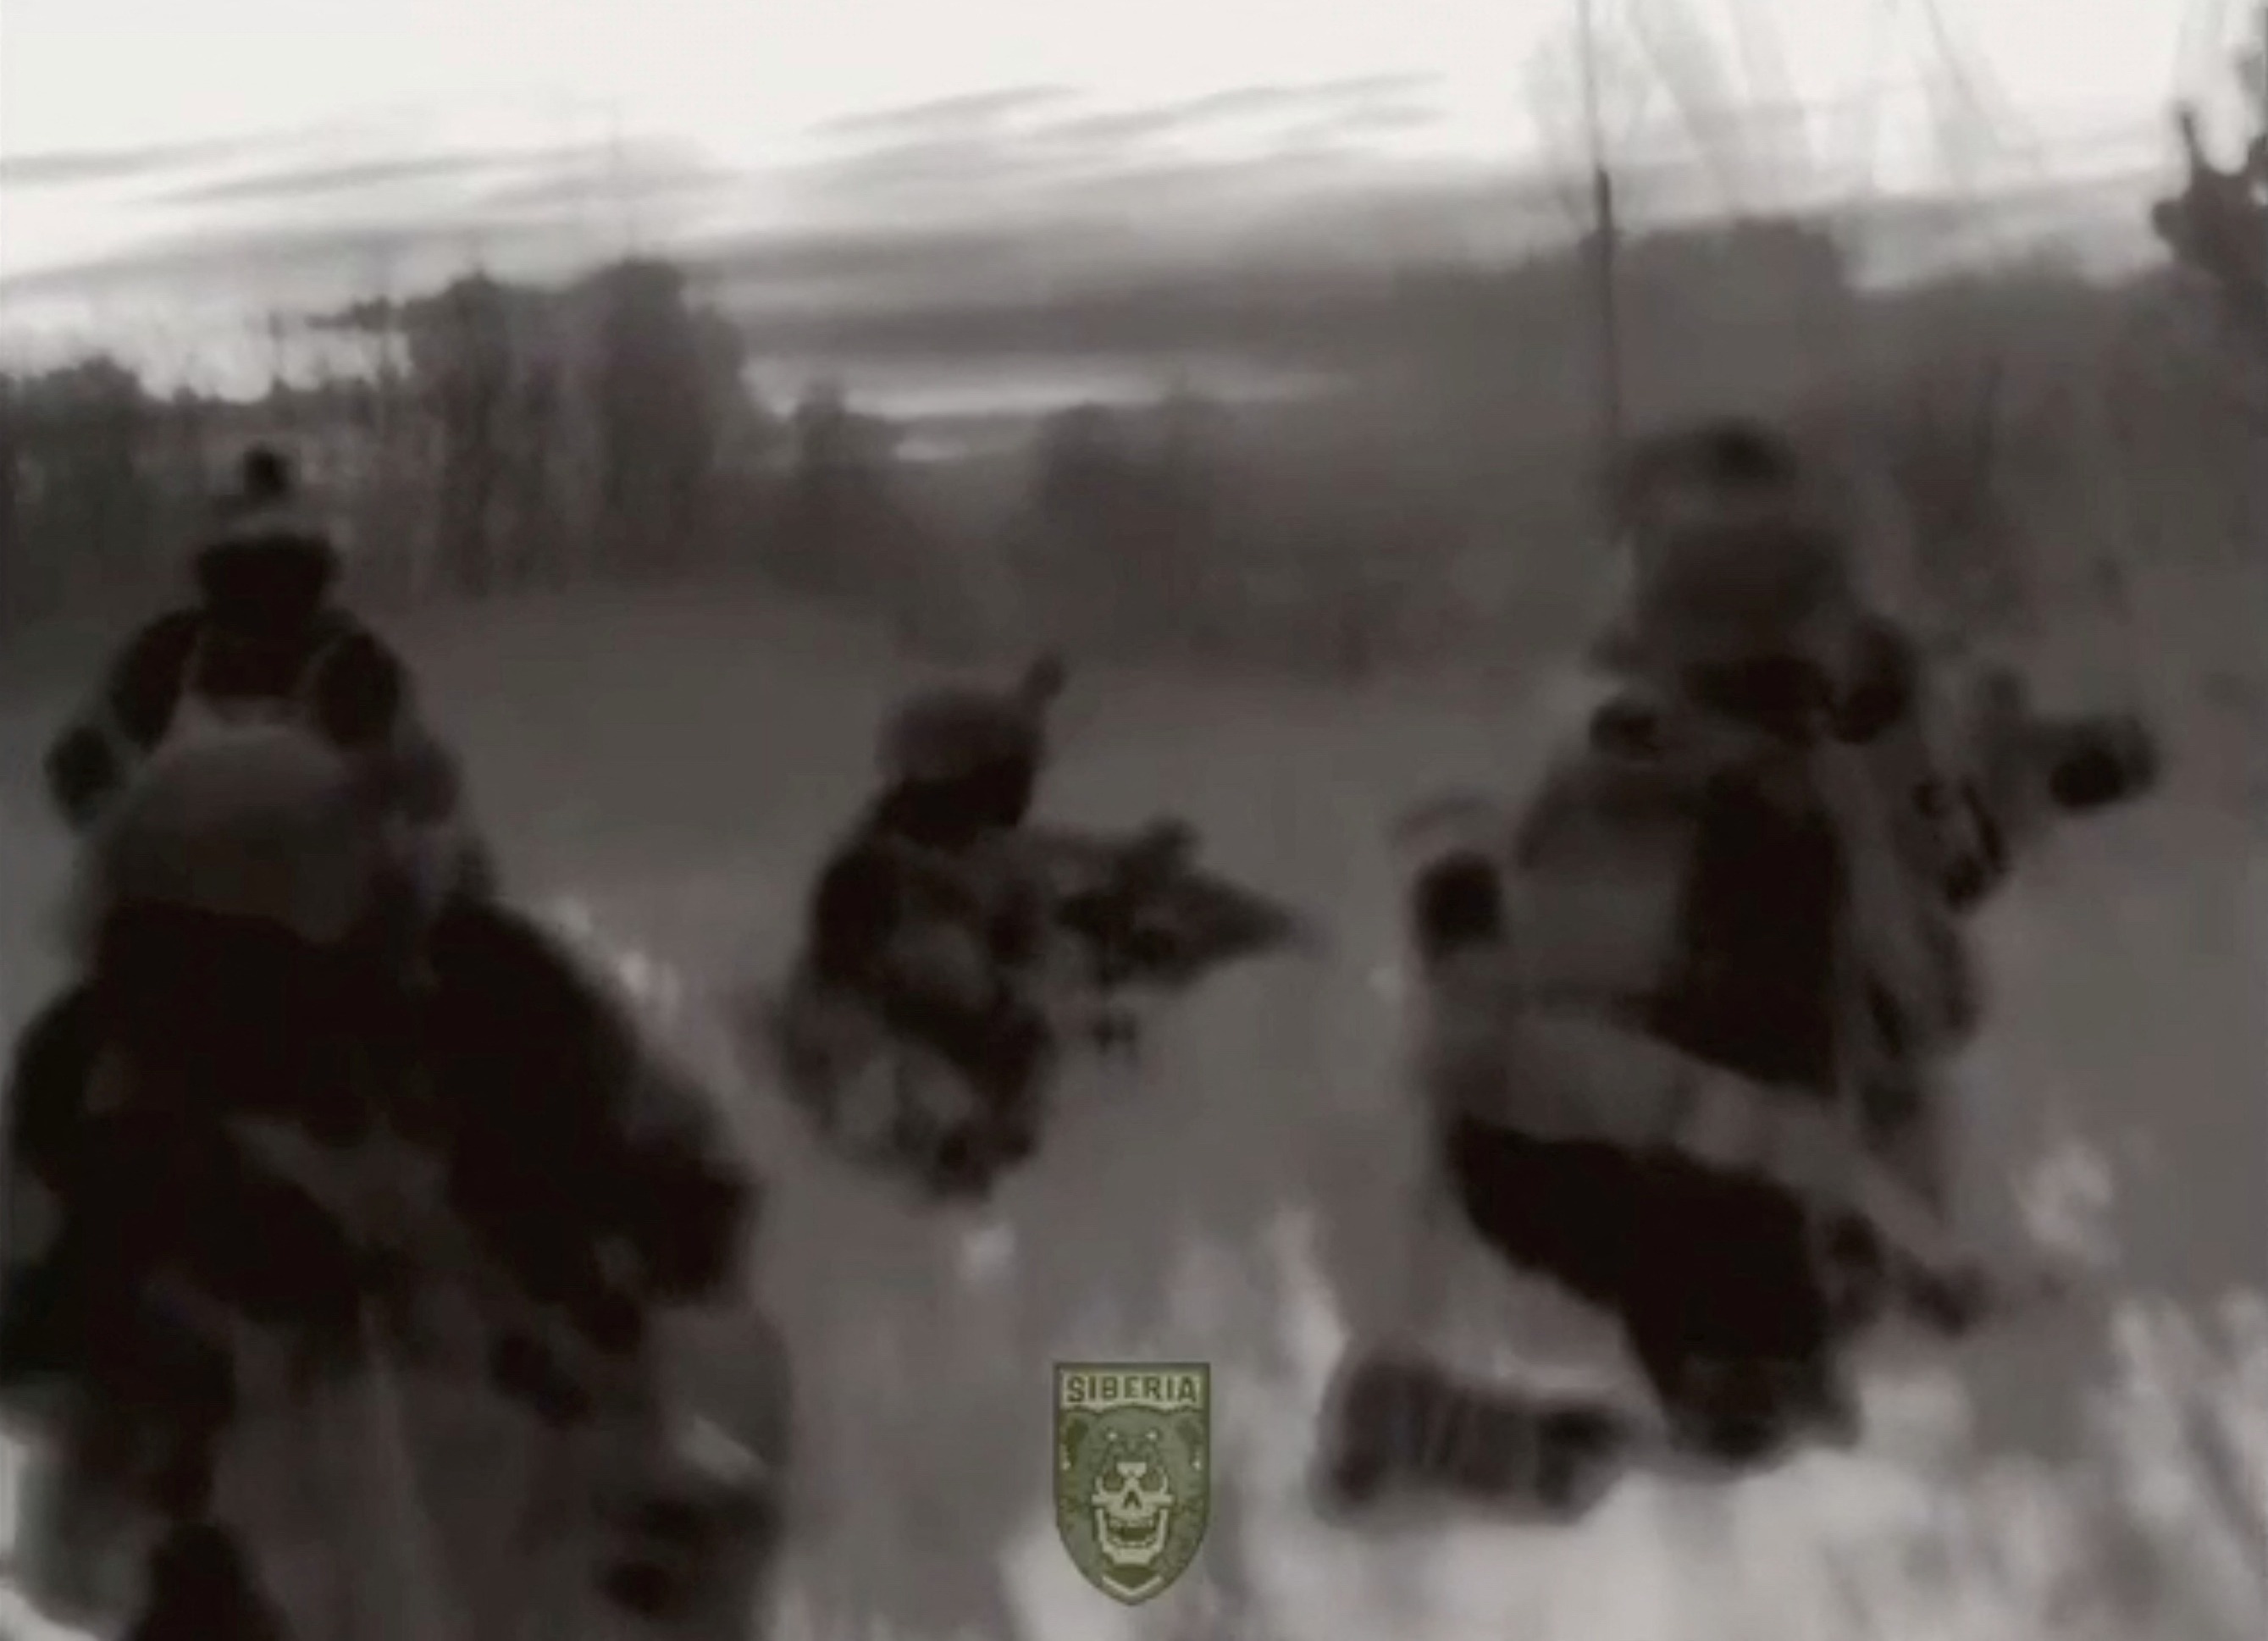 The Siberian Battalion (SB) released headcam footage from the ongoing assault